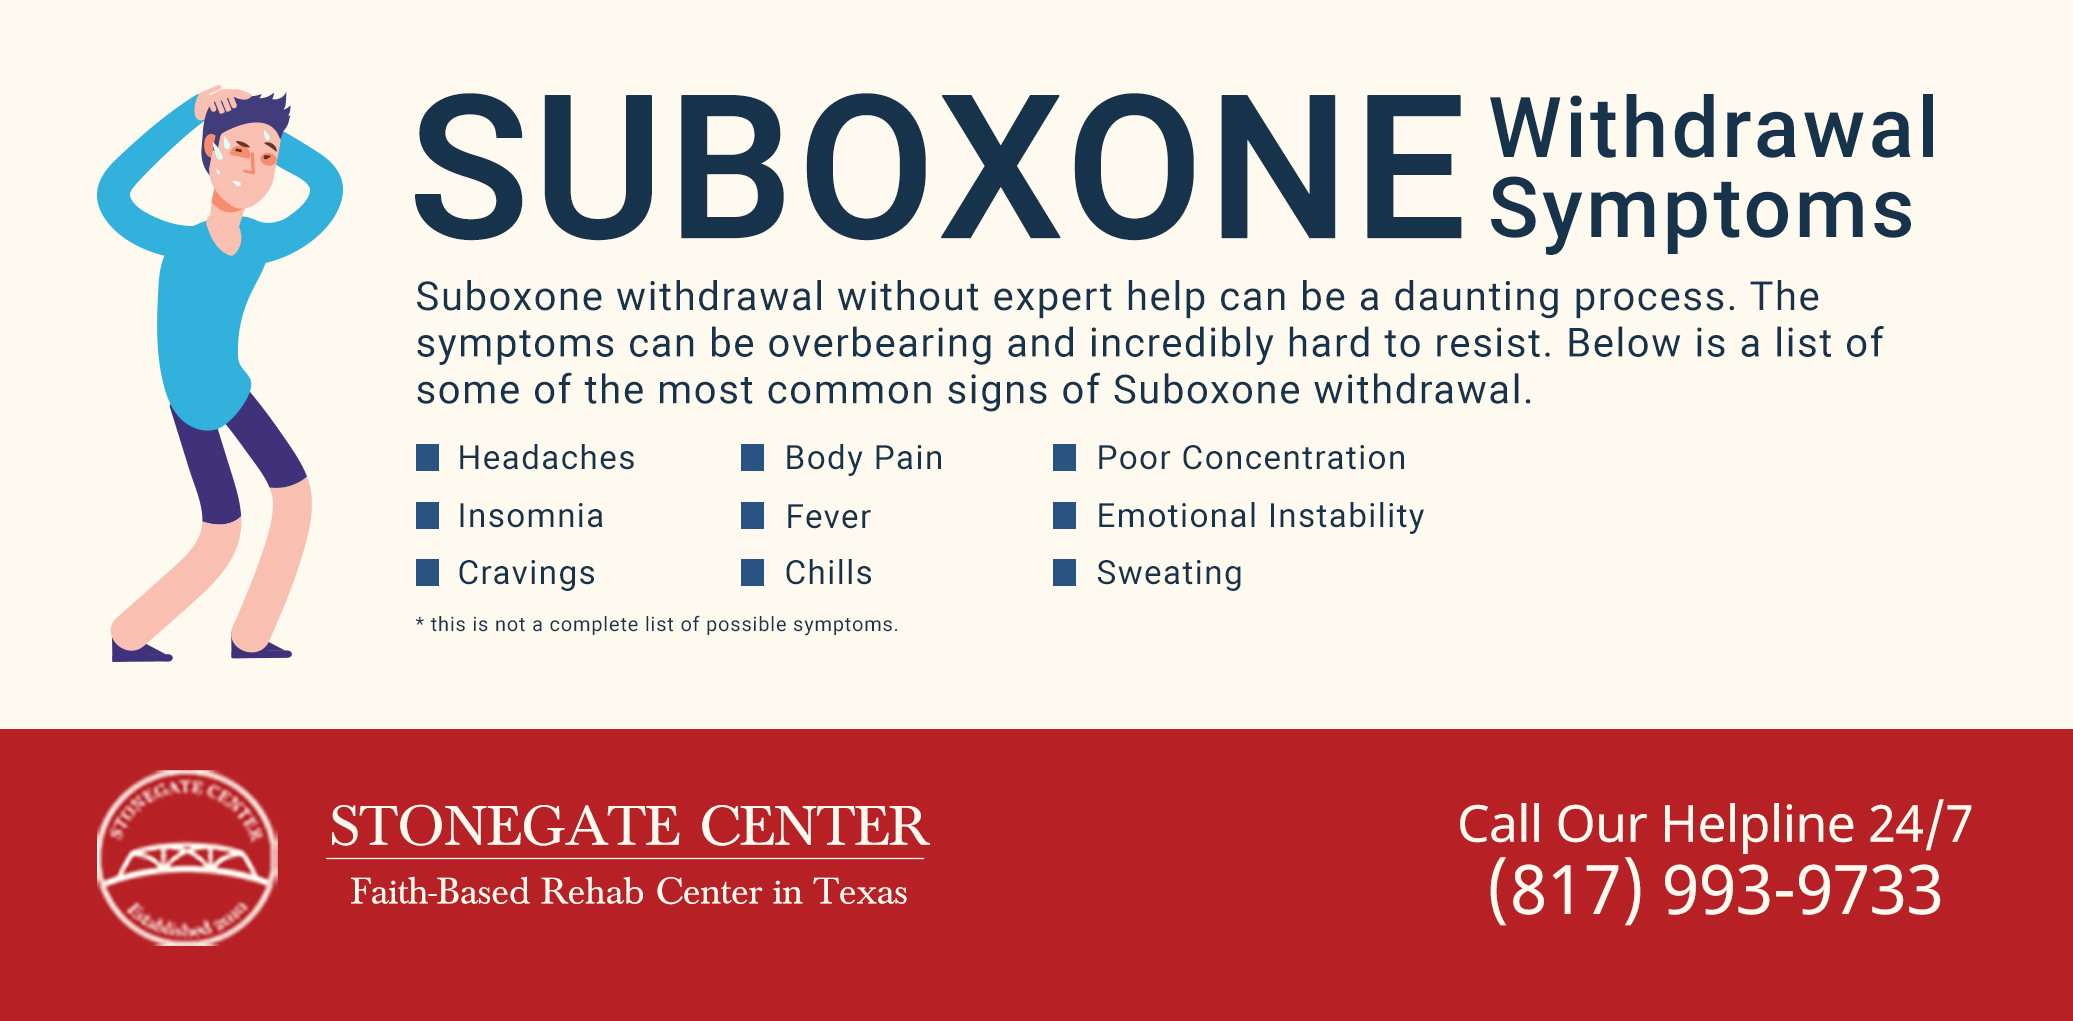 Stonegate Center Blog - A Guide to Suboxone Dependence & Detox - Suboxone Withdrawal Symptoms